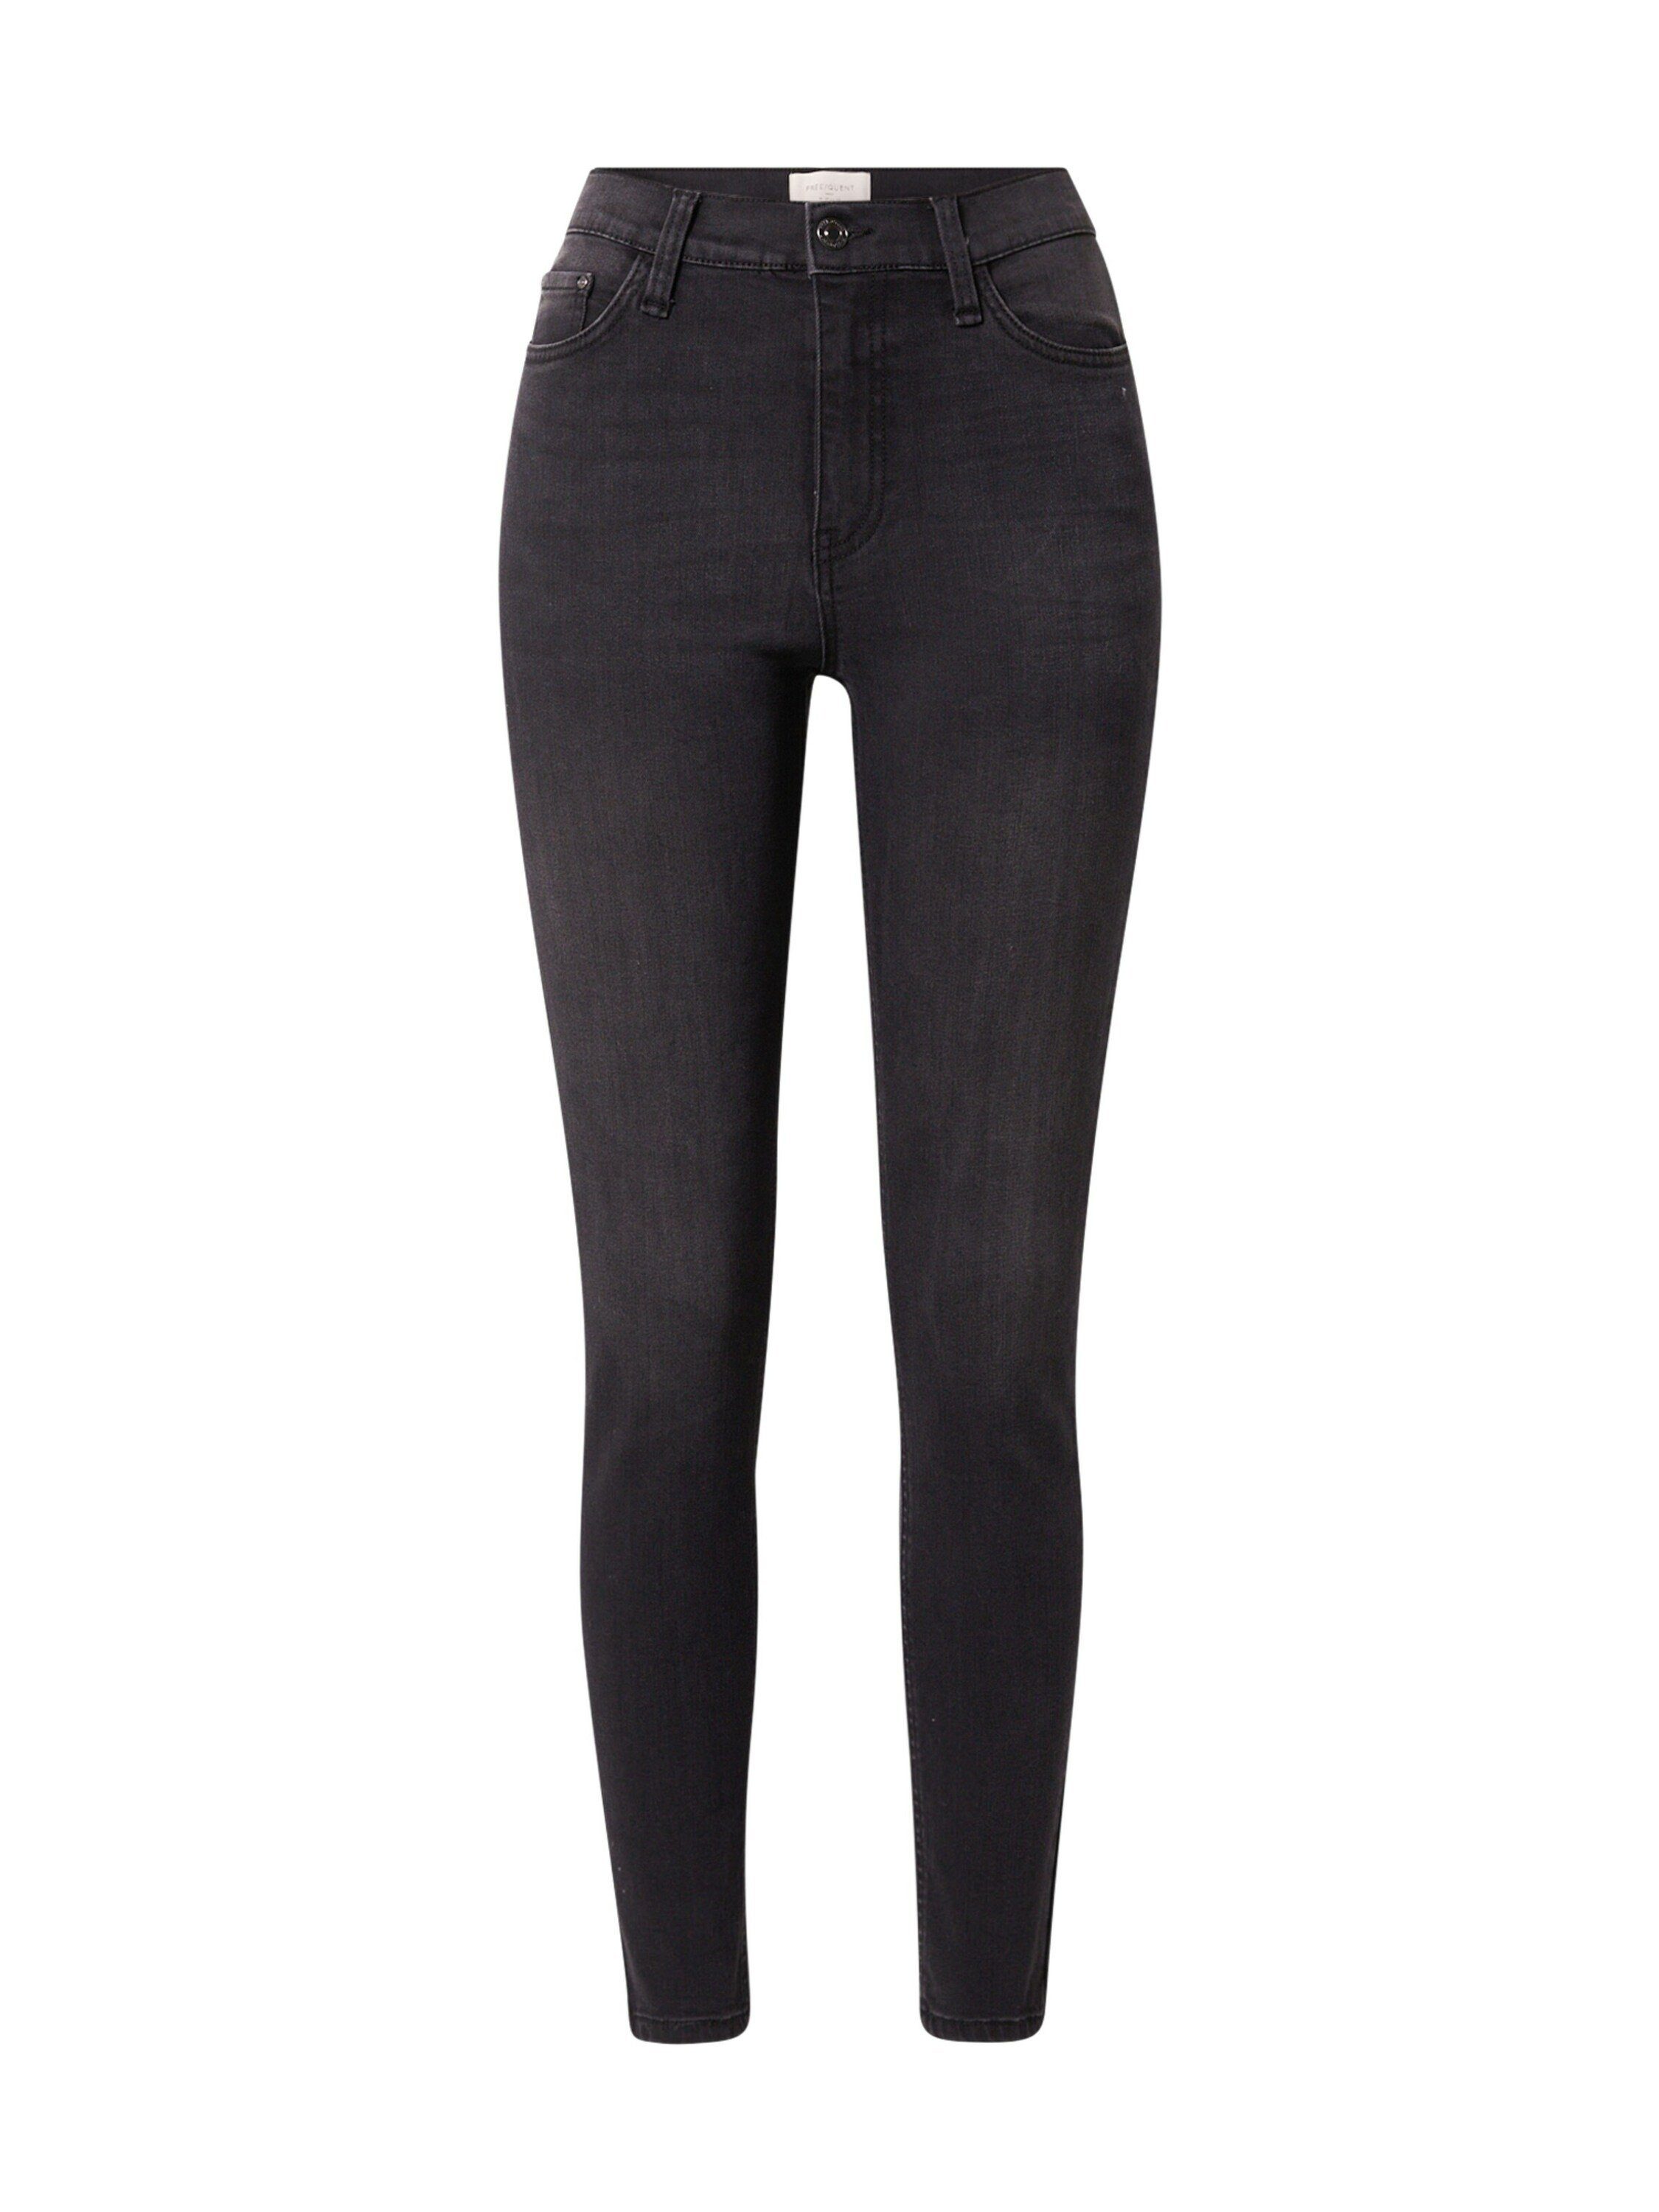 Weiteres FREEQUENT Detail (1-tlg) HARLOW High-waist-Jeans